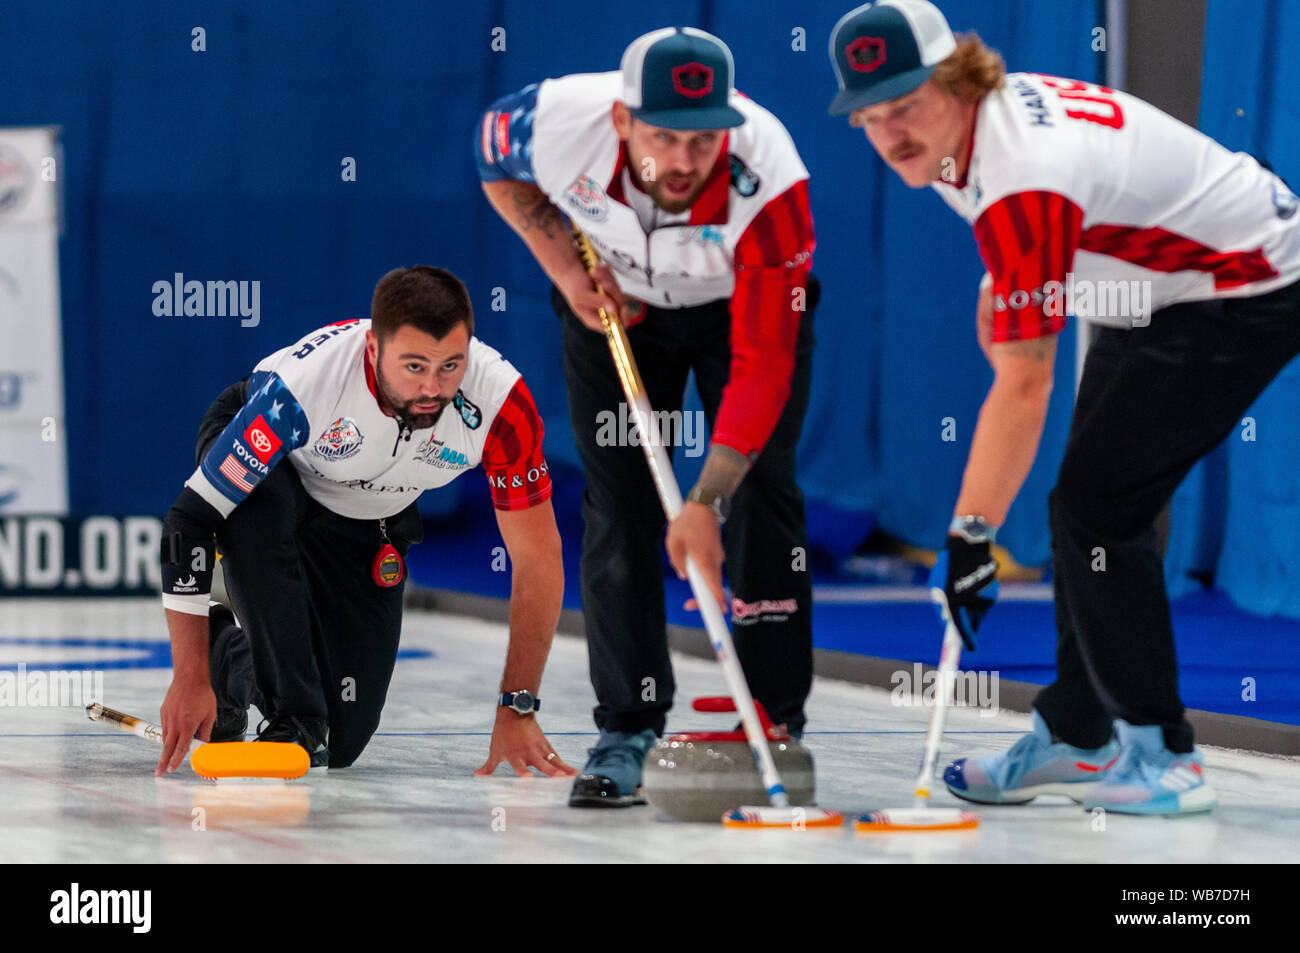 Raleigh, North Carolina, USA. 24th Aug, 2019. Aug. 24, 2019 Ã RALEIGH, N.C., US - JOHN LANDSTEINER, left, CHRIS PLYS, center, and MATT HAMILTON of the United States in action during Curling Night in America at the Raleigh Ice Plex. Curling Night in America featured members of the U.S. Olympic menÃs gold medal team from the 2018 Winter Olympics in South Korea, the U.S. womenÃs team, as well as teams from Italy, Japan, and Scotland, Aug. 22-24, 2019. Credit: Timothy L. Hale/ZUMA Wire/Alamy Live News Stock Photo